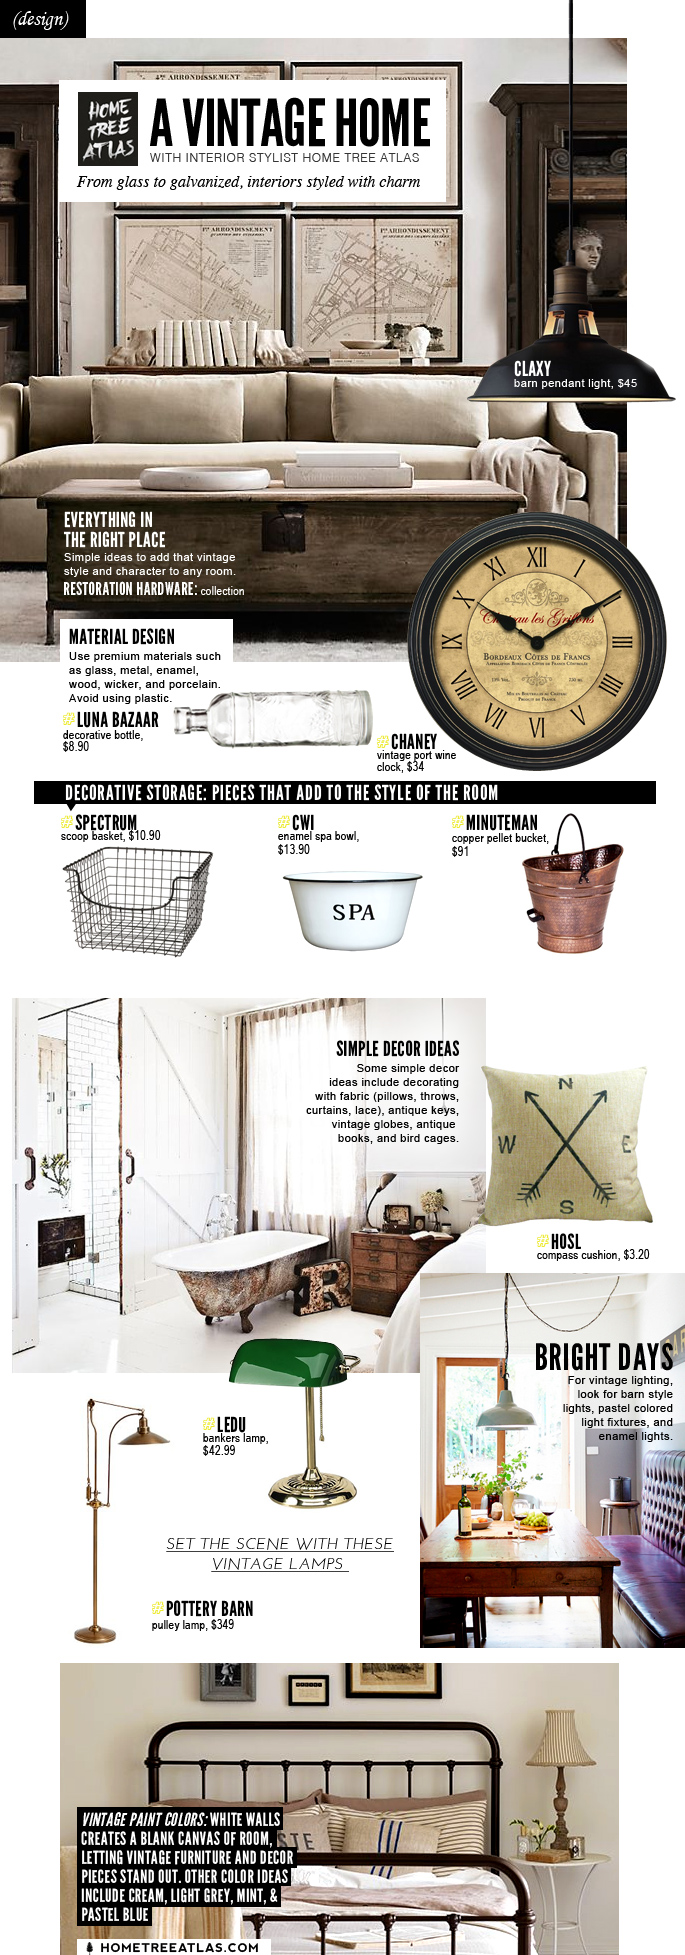 The Vintage Home Style Guide: Ideas That Make Vintage Interior Design Easier